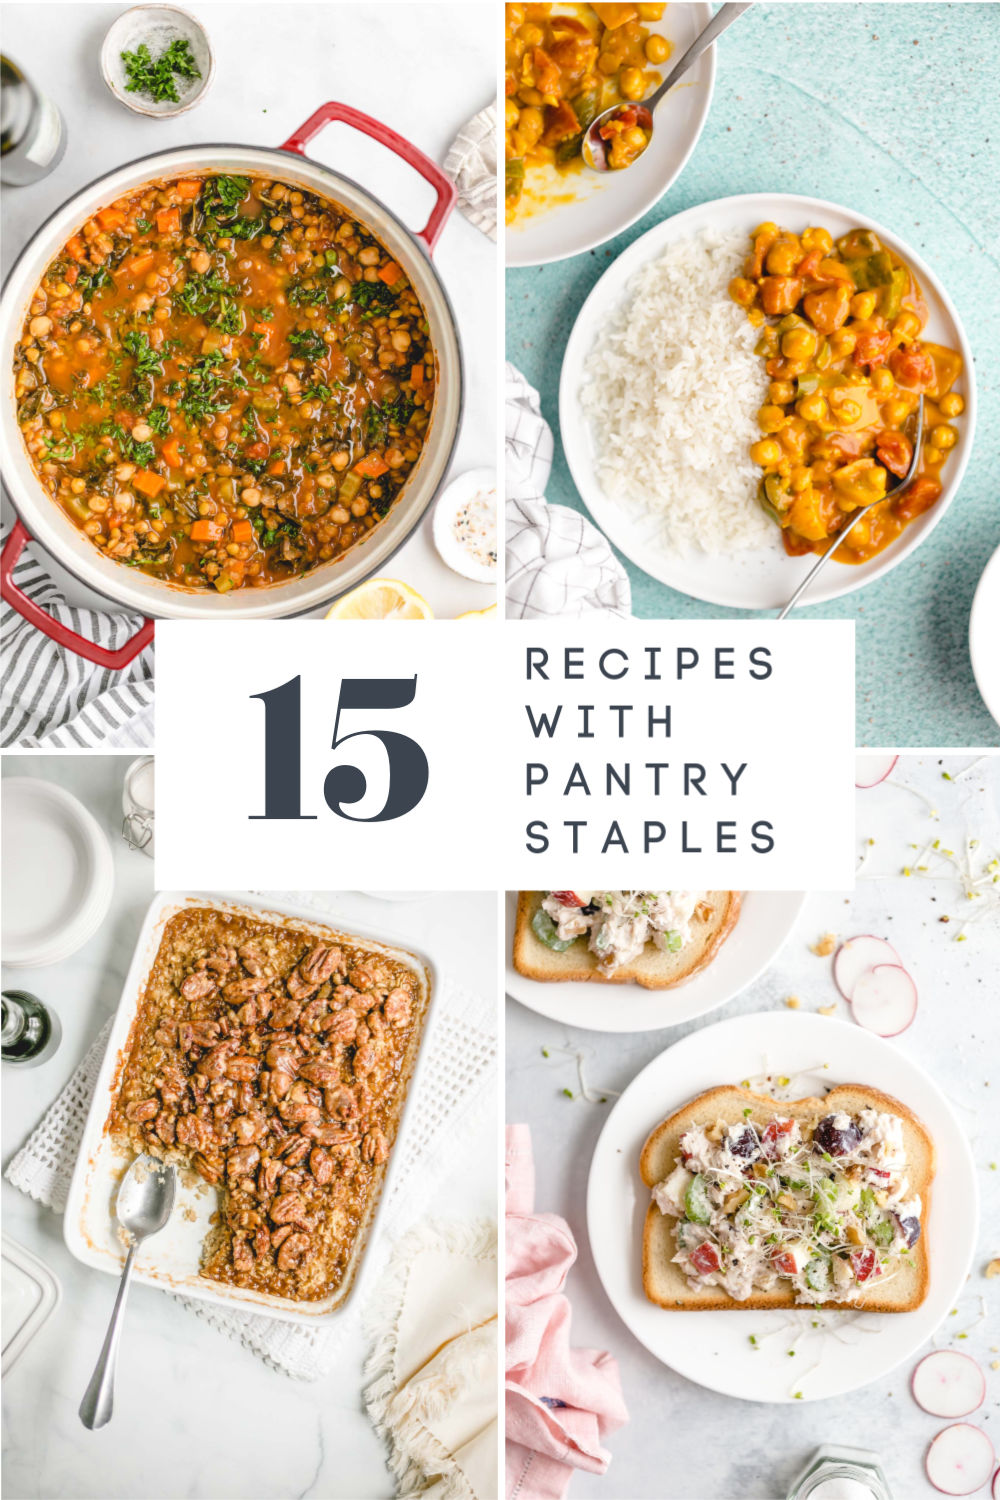 15 Recipes Made with Pantry Staples! 